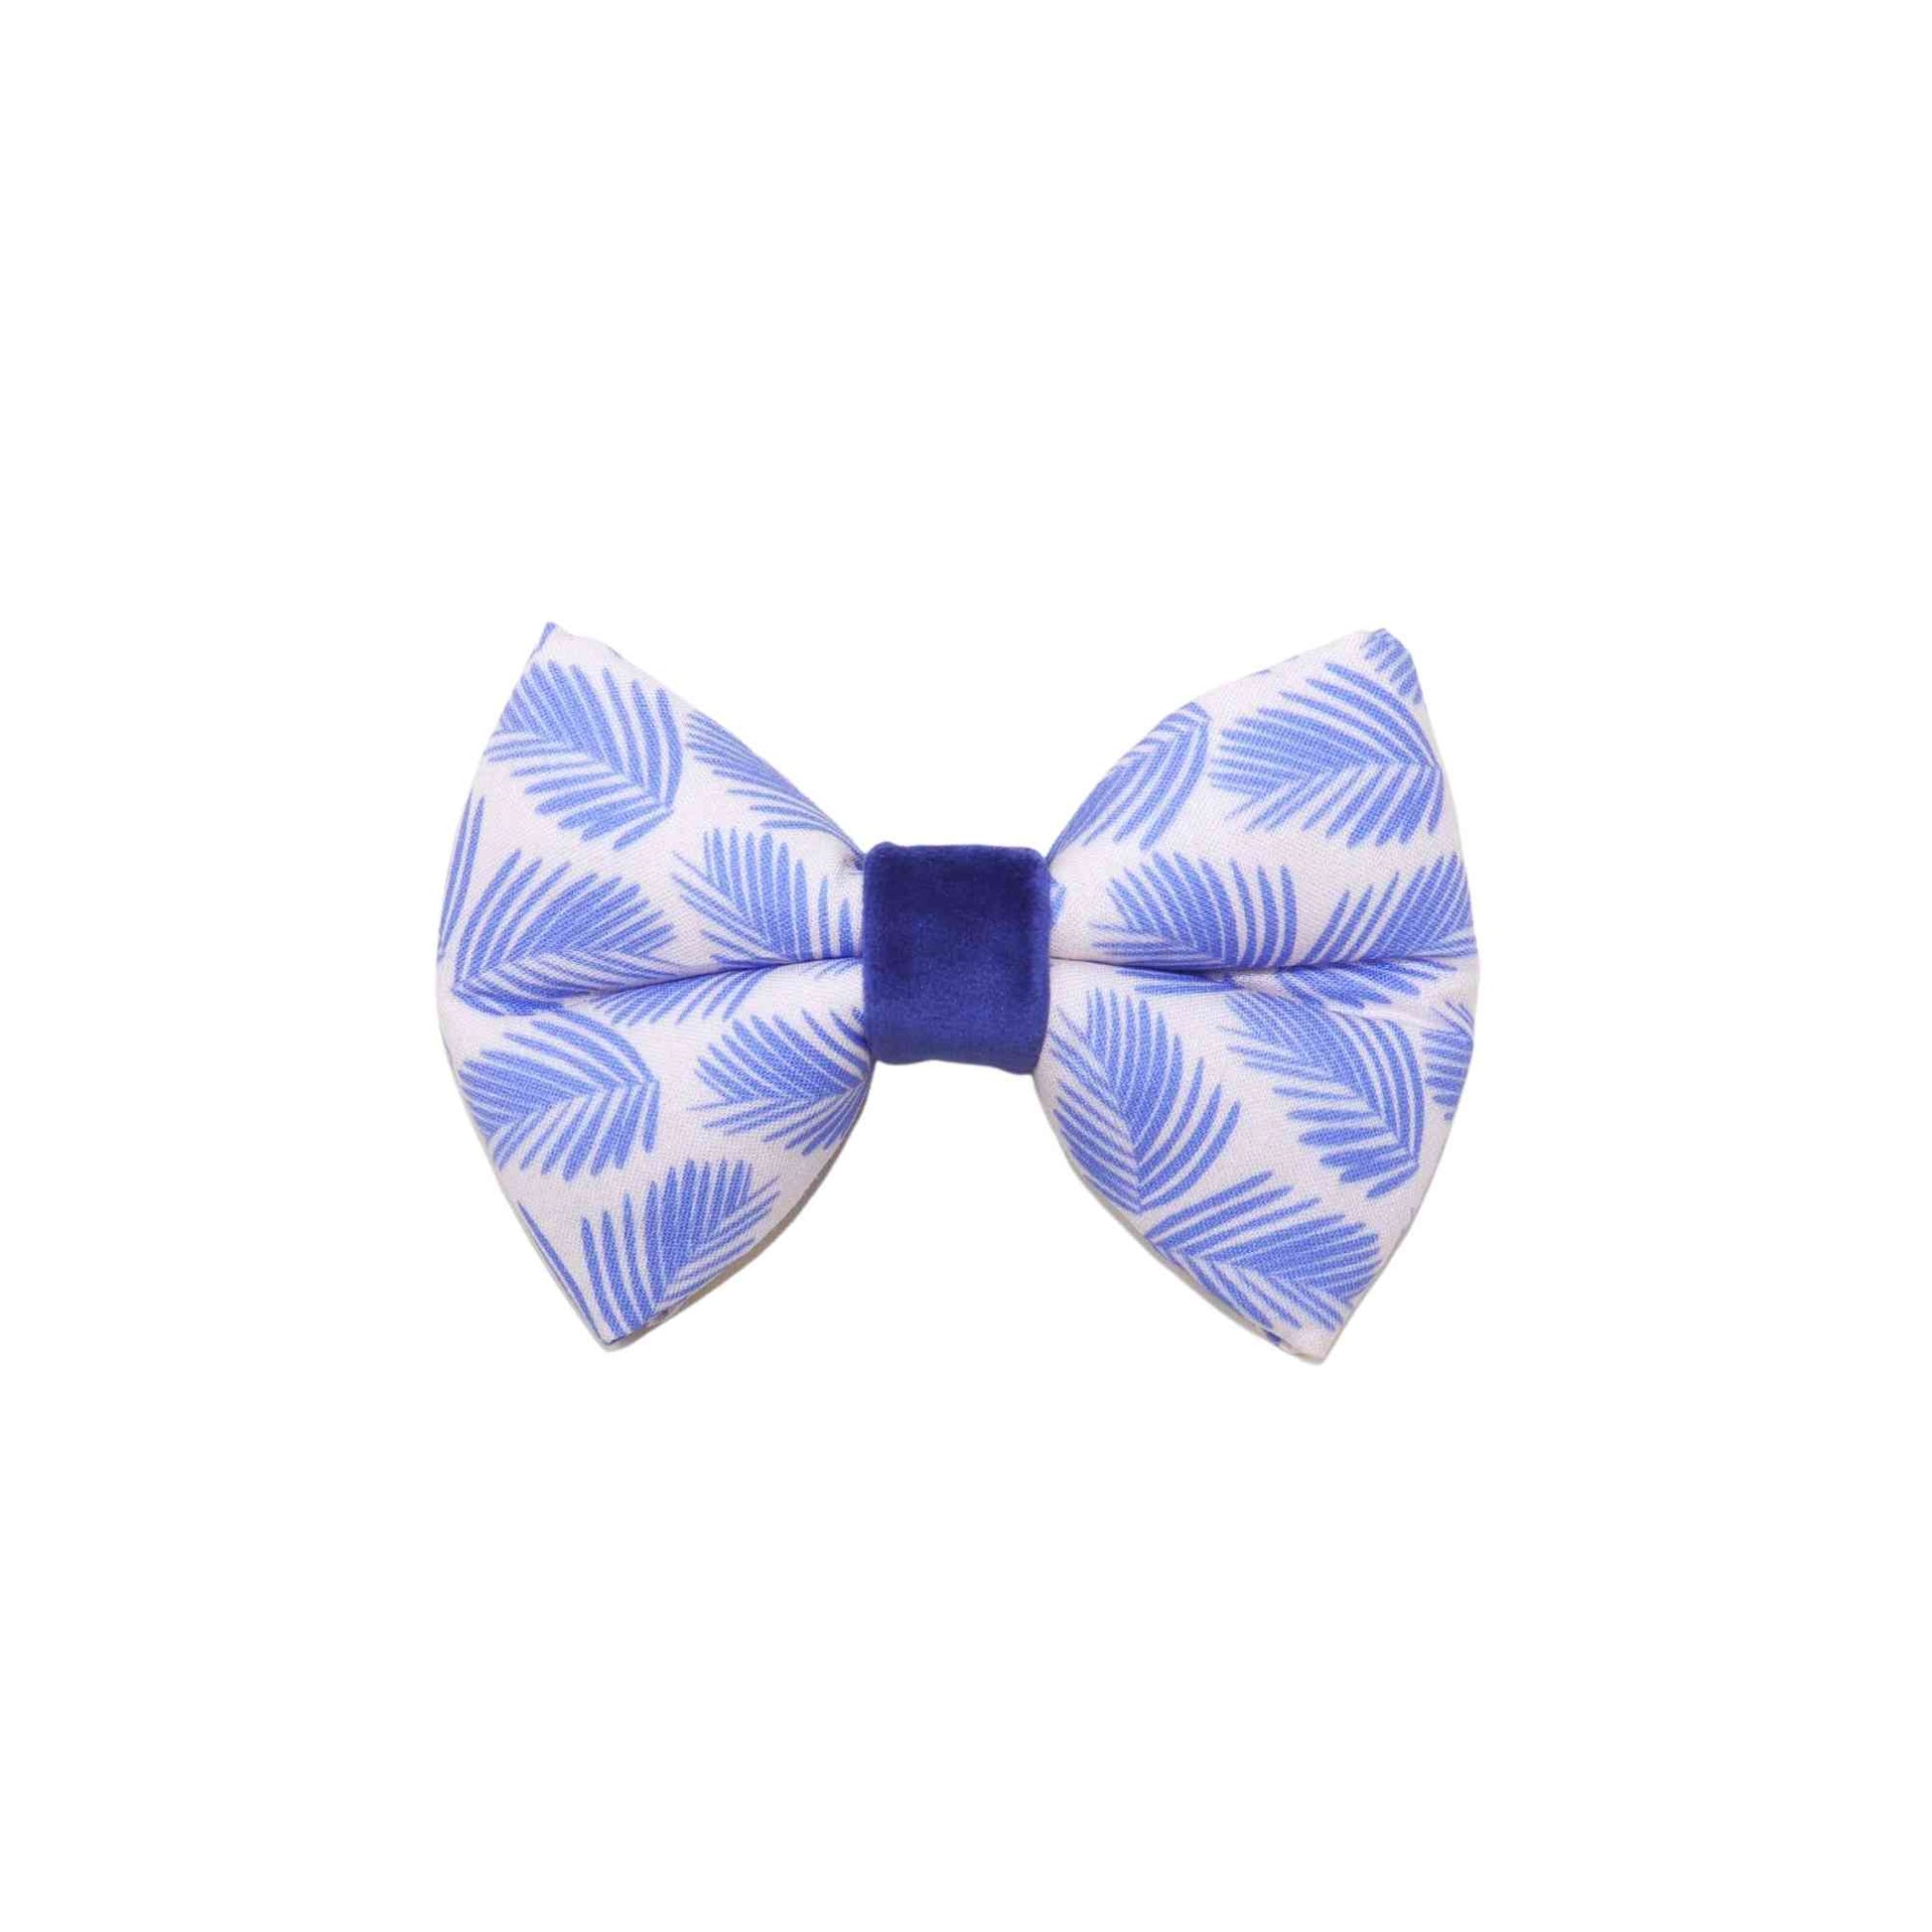 Get your furry friend ready for summer with our "California" Blue Palms summer dog bow tie! Our bow tie is designed to fit over your pet's collar, making it easy and comfortable to wear. Suitable for large to small breeds, our bow tie is made of high-quality materials, ensuring durability and long-lasting use. 